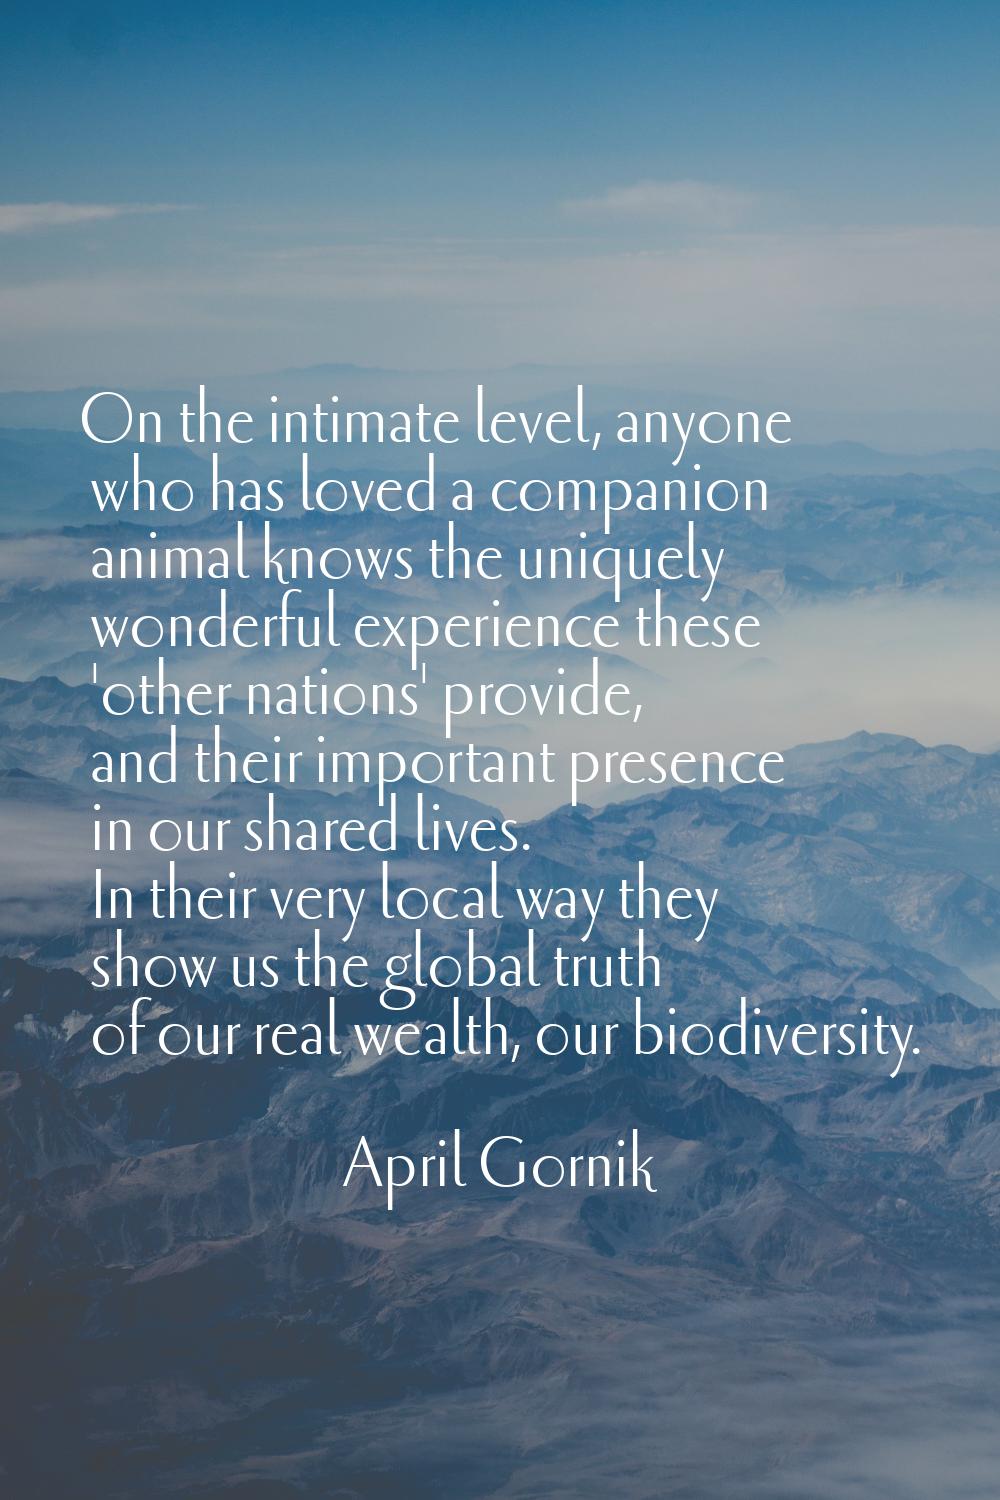 On the intimate level, anyone who has loved a companion animal knows the uniquely wonderful experie